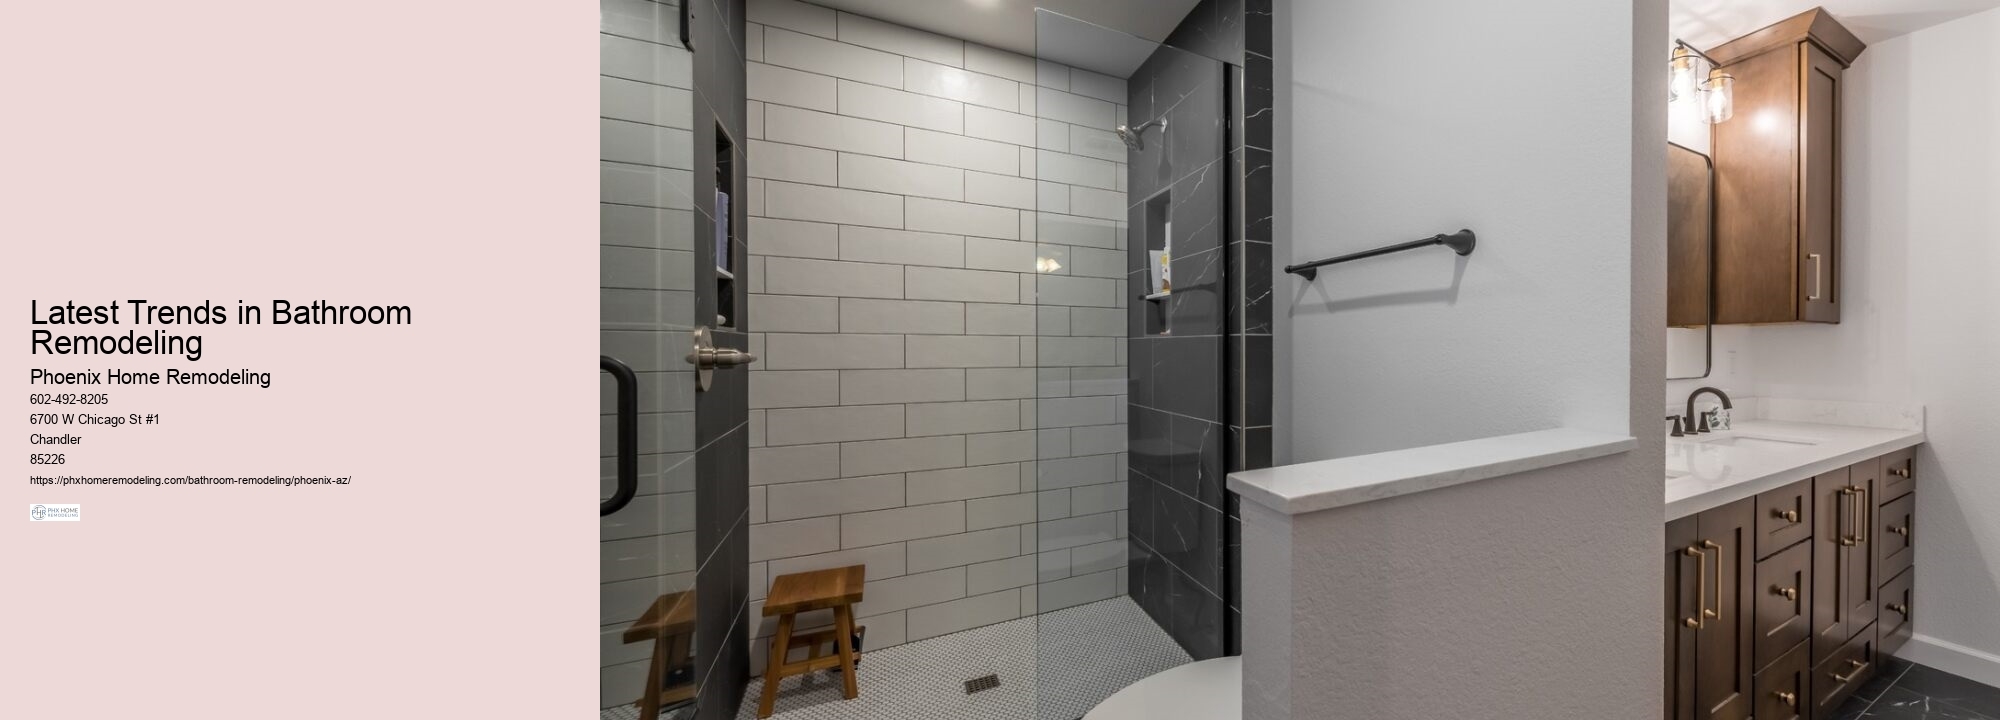 Does a tiled shower add value to home